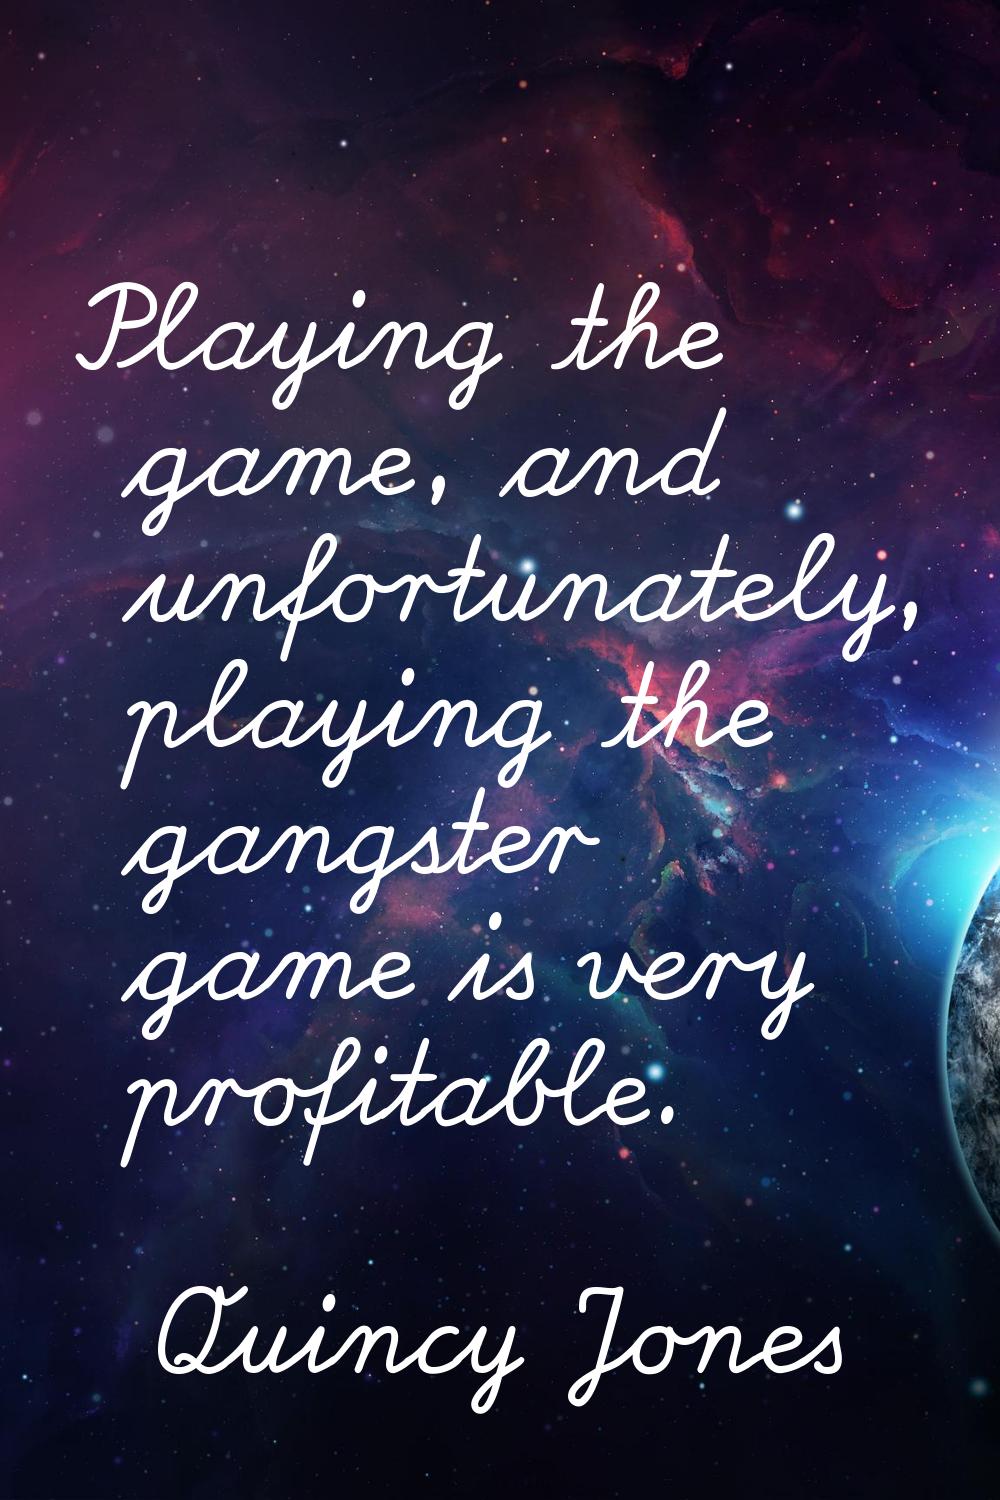 Playing the game, and unfortunately, playing the gangster game is very profitable.